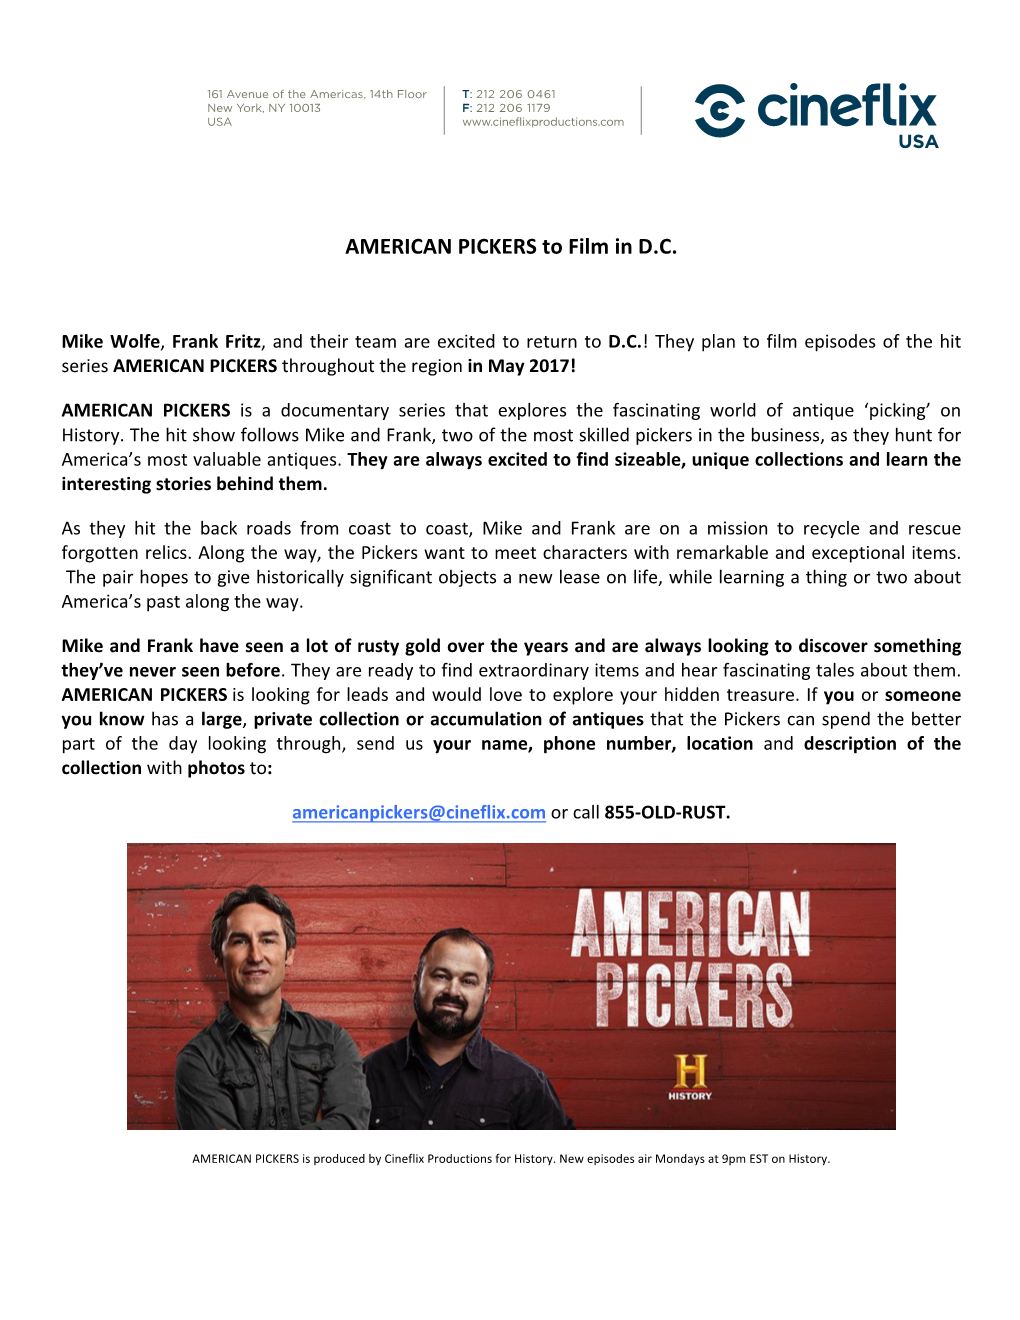 AMERICAN PICKERS to Film in D.C